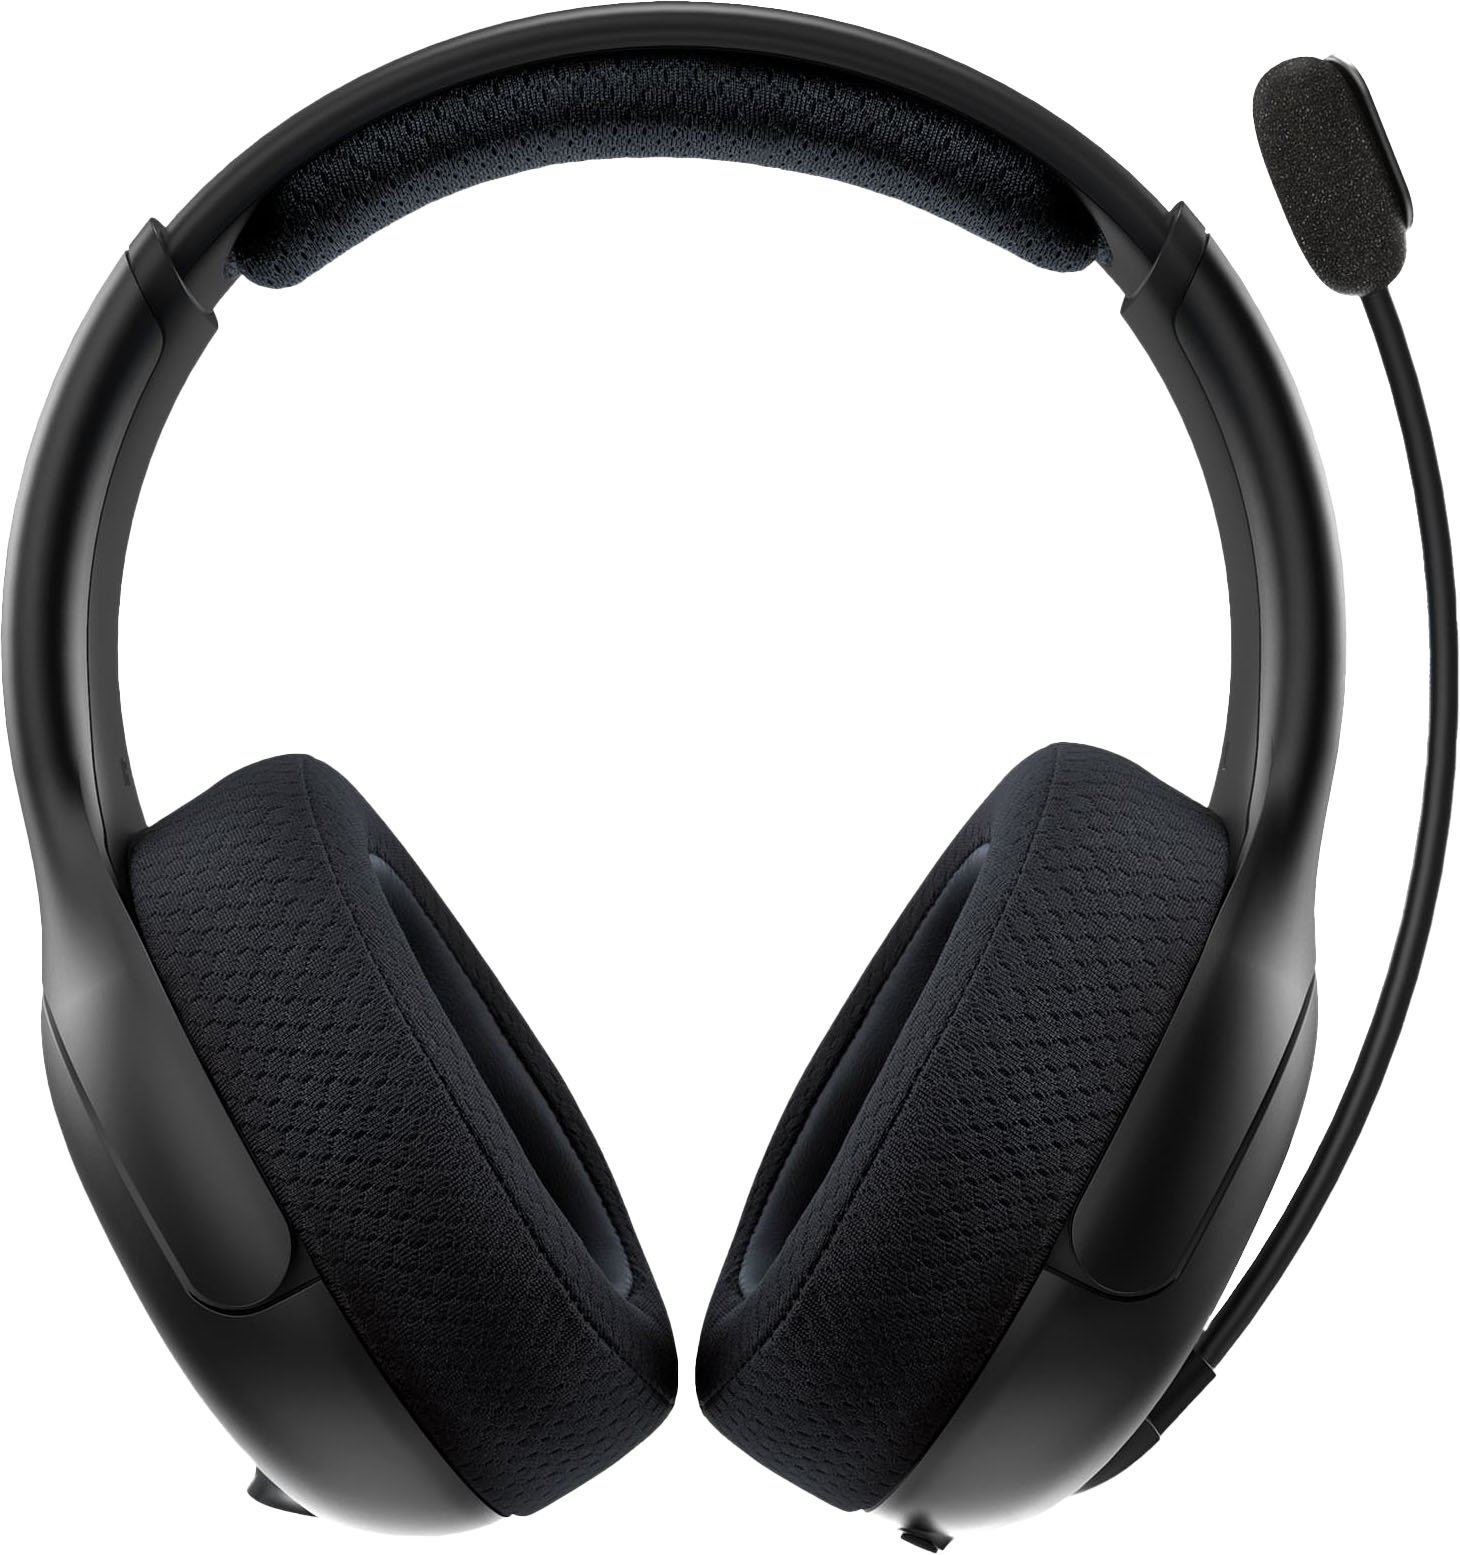 PDP LVL50 Wireless Gaming Stereo Headset with Noise Cancelling Microphone - Grey